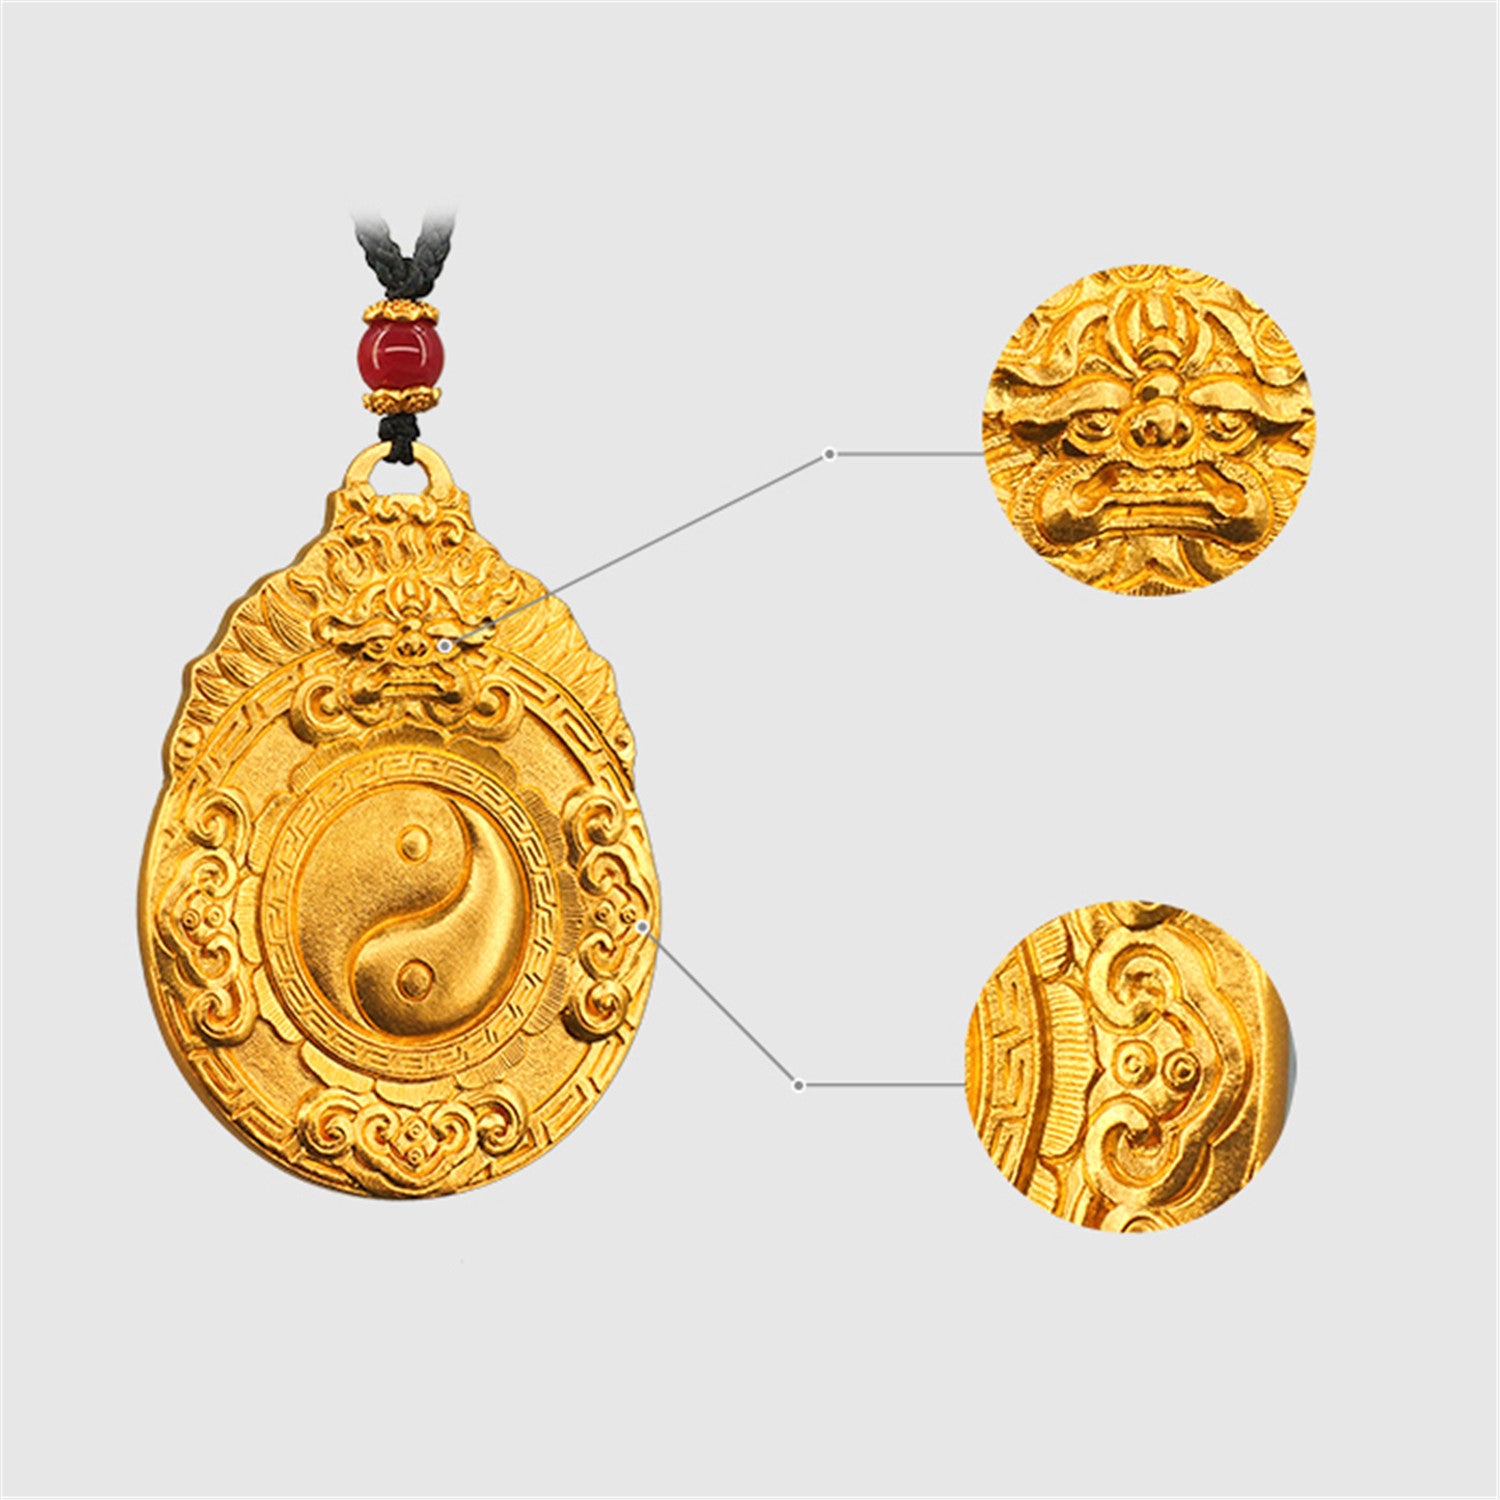 EVECOCO Full Gold Tai Chi Pendants,Hand Forging,Fine Carving 55g